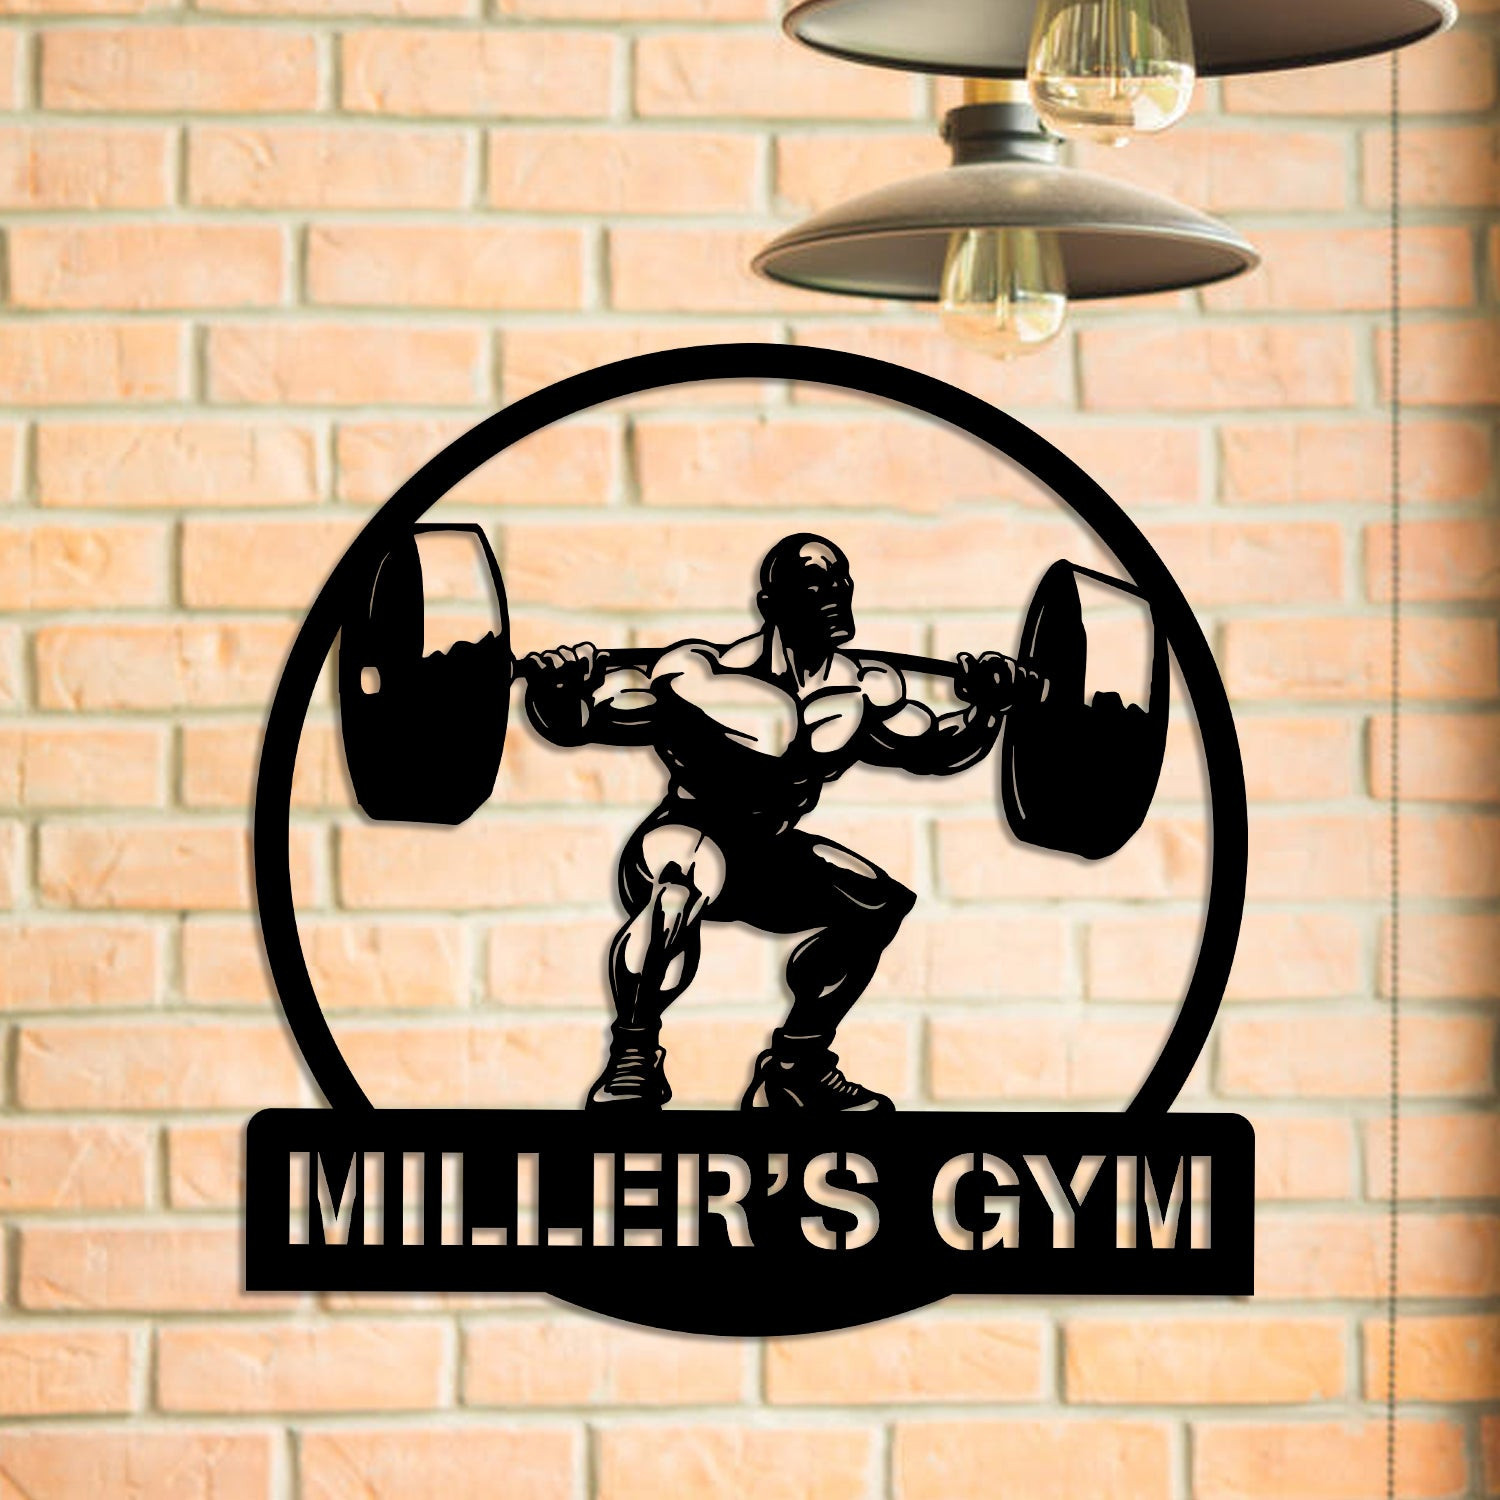 Personalized Metal Gym Sign, Fitness Center, Club, Home Wall Decor, Metal Laser Cut Metal Signs Custom Gift Ideas 24x24IN